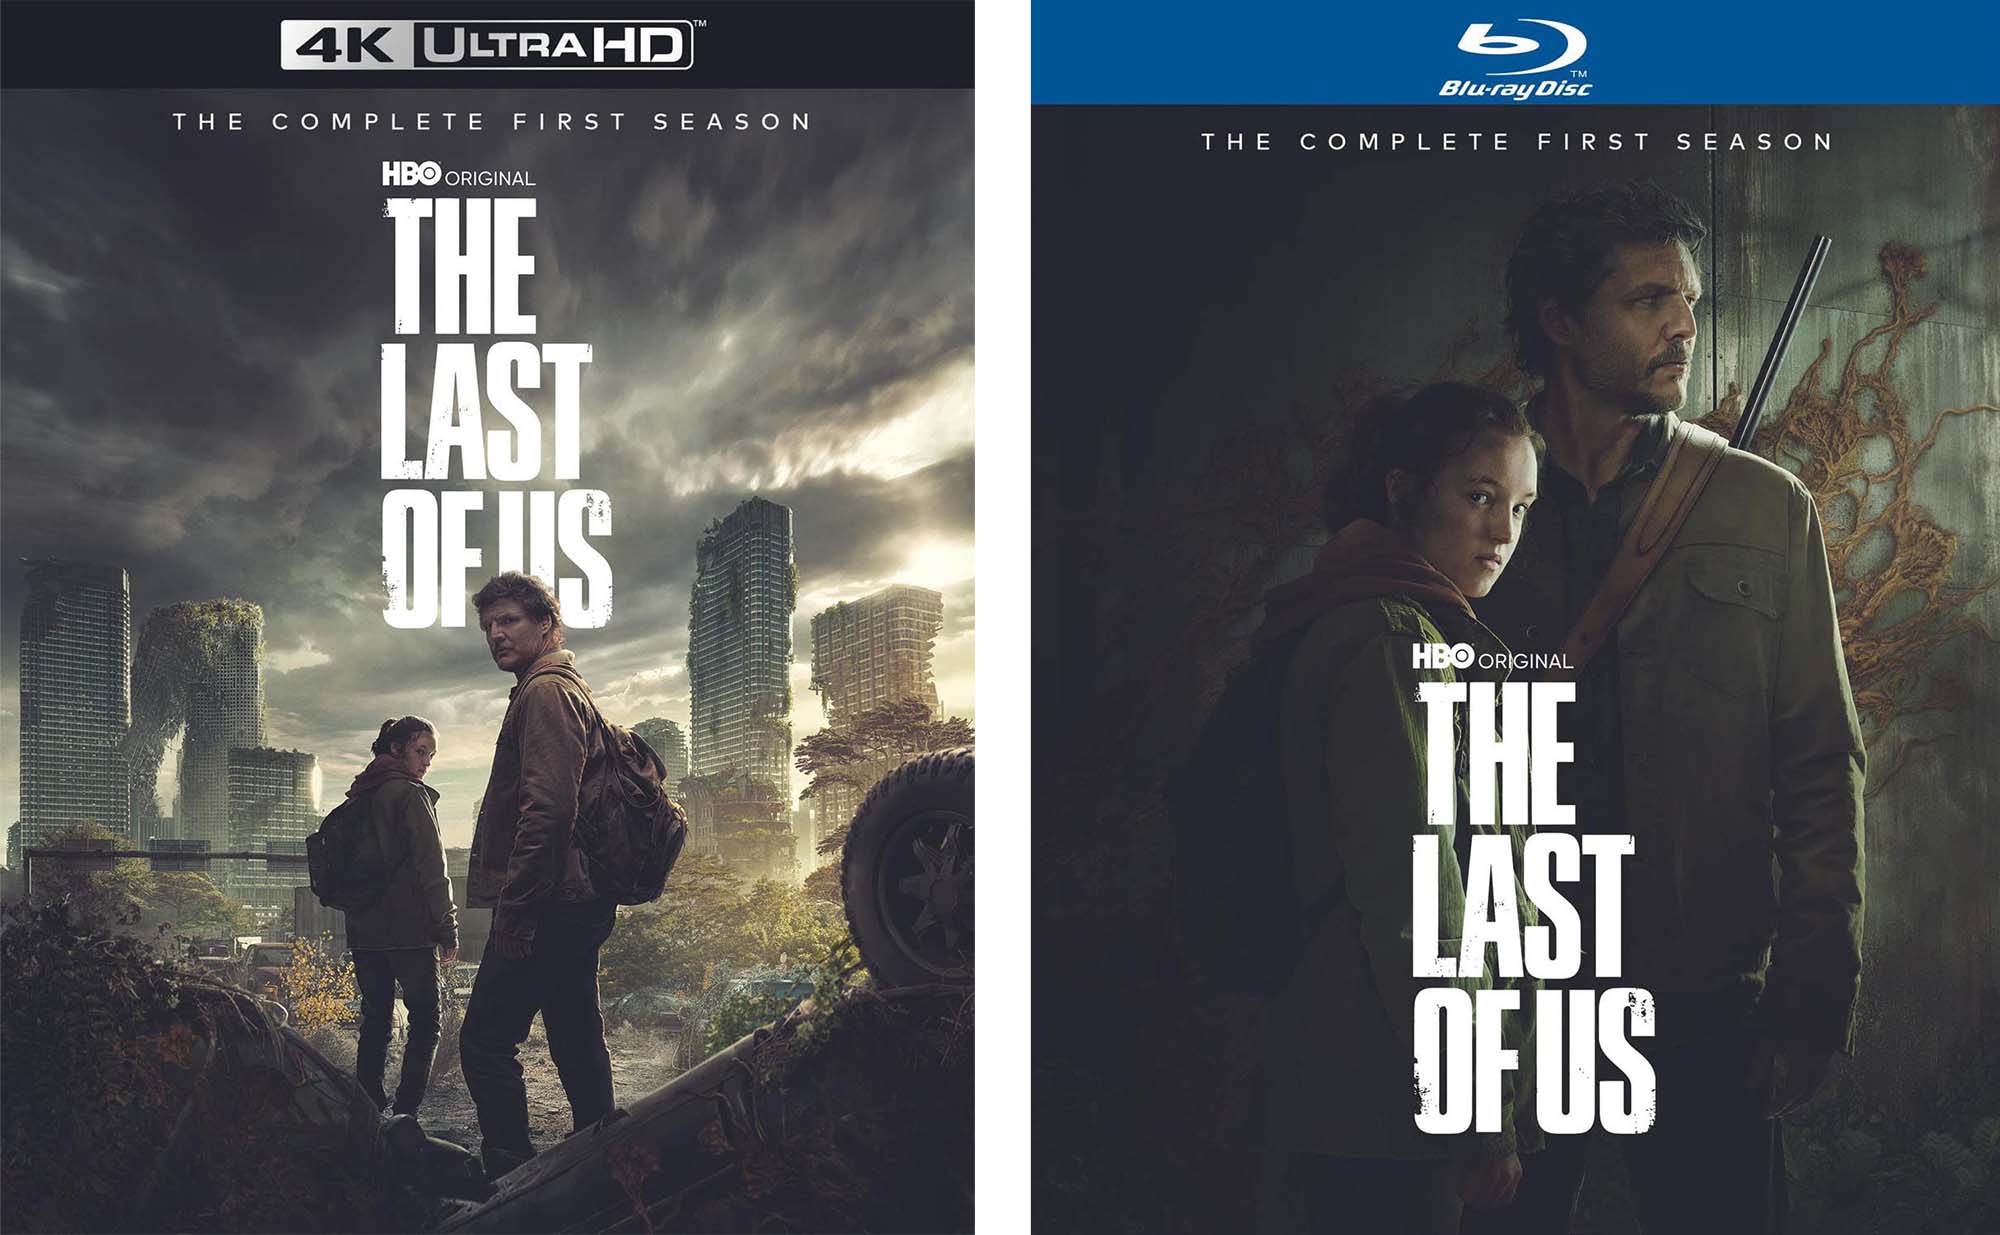 The Last of Us: The Complete First Season 4k Blu-ray & Blu-ray